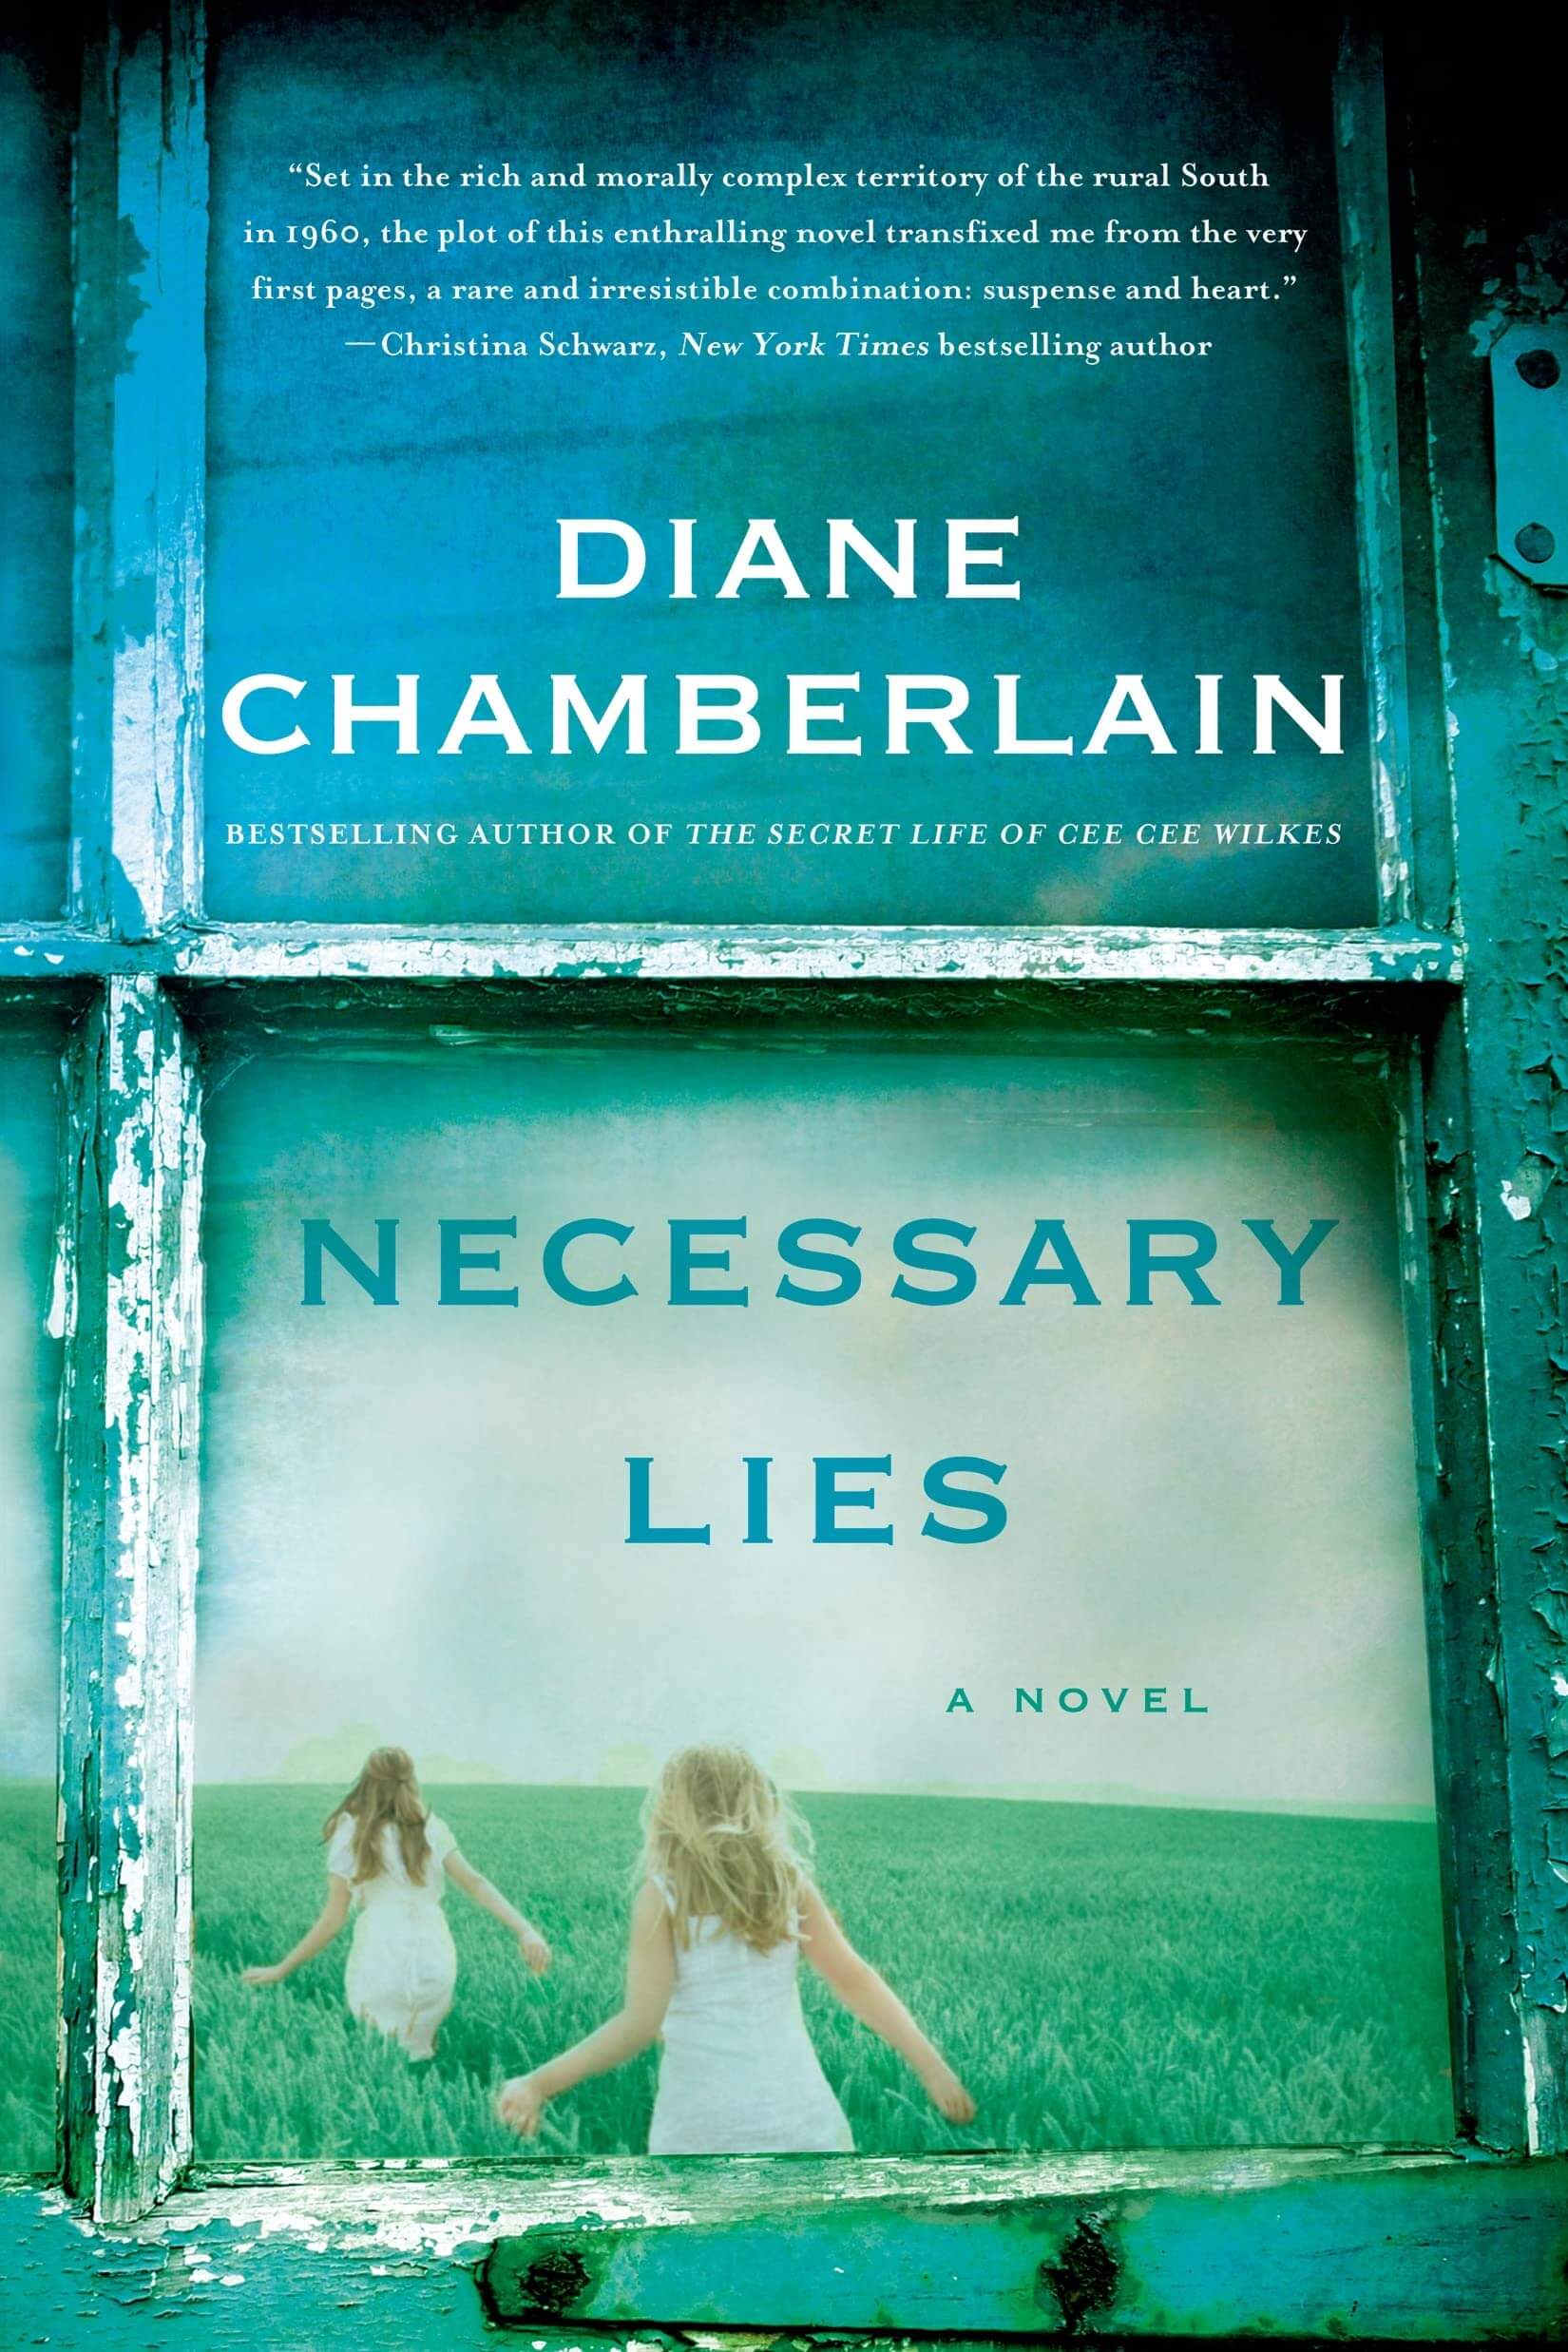 Cover of Necessary Lies by Diane Chamberlain